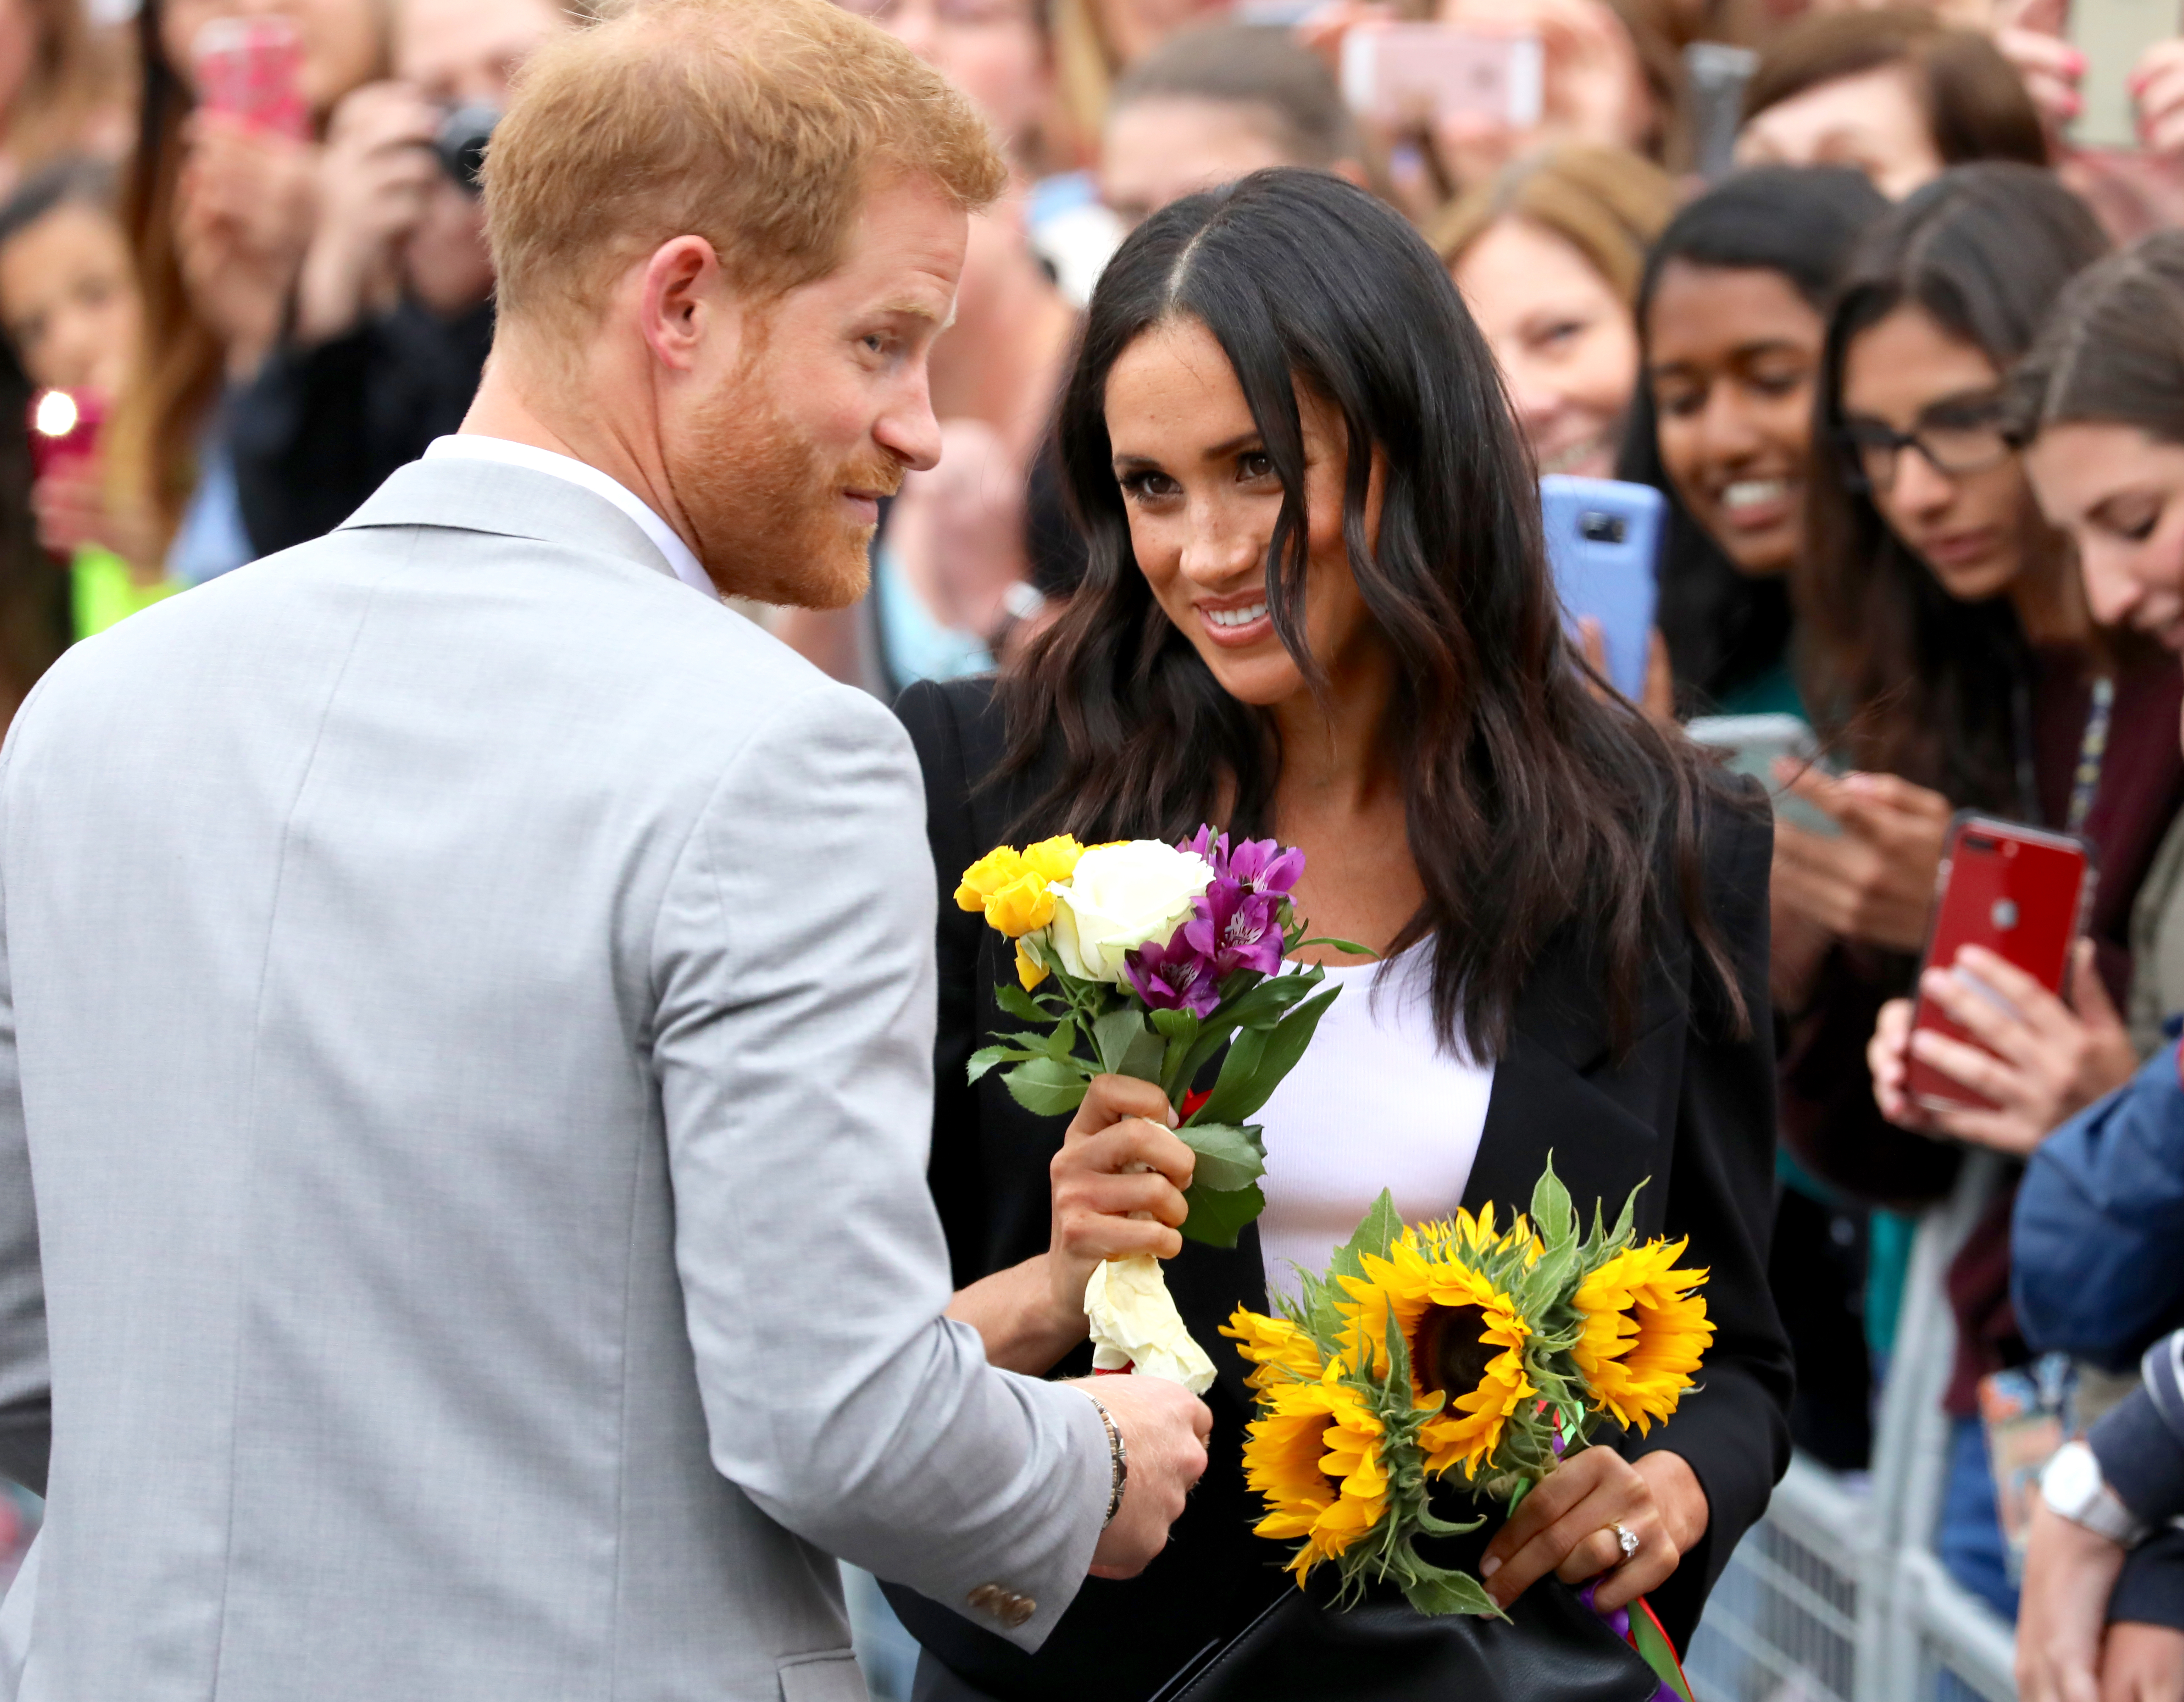 The Duke and Duchess of Sussex in Ireland